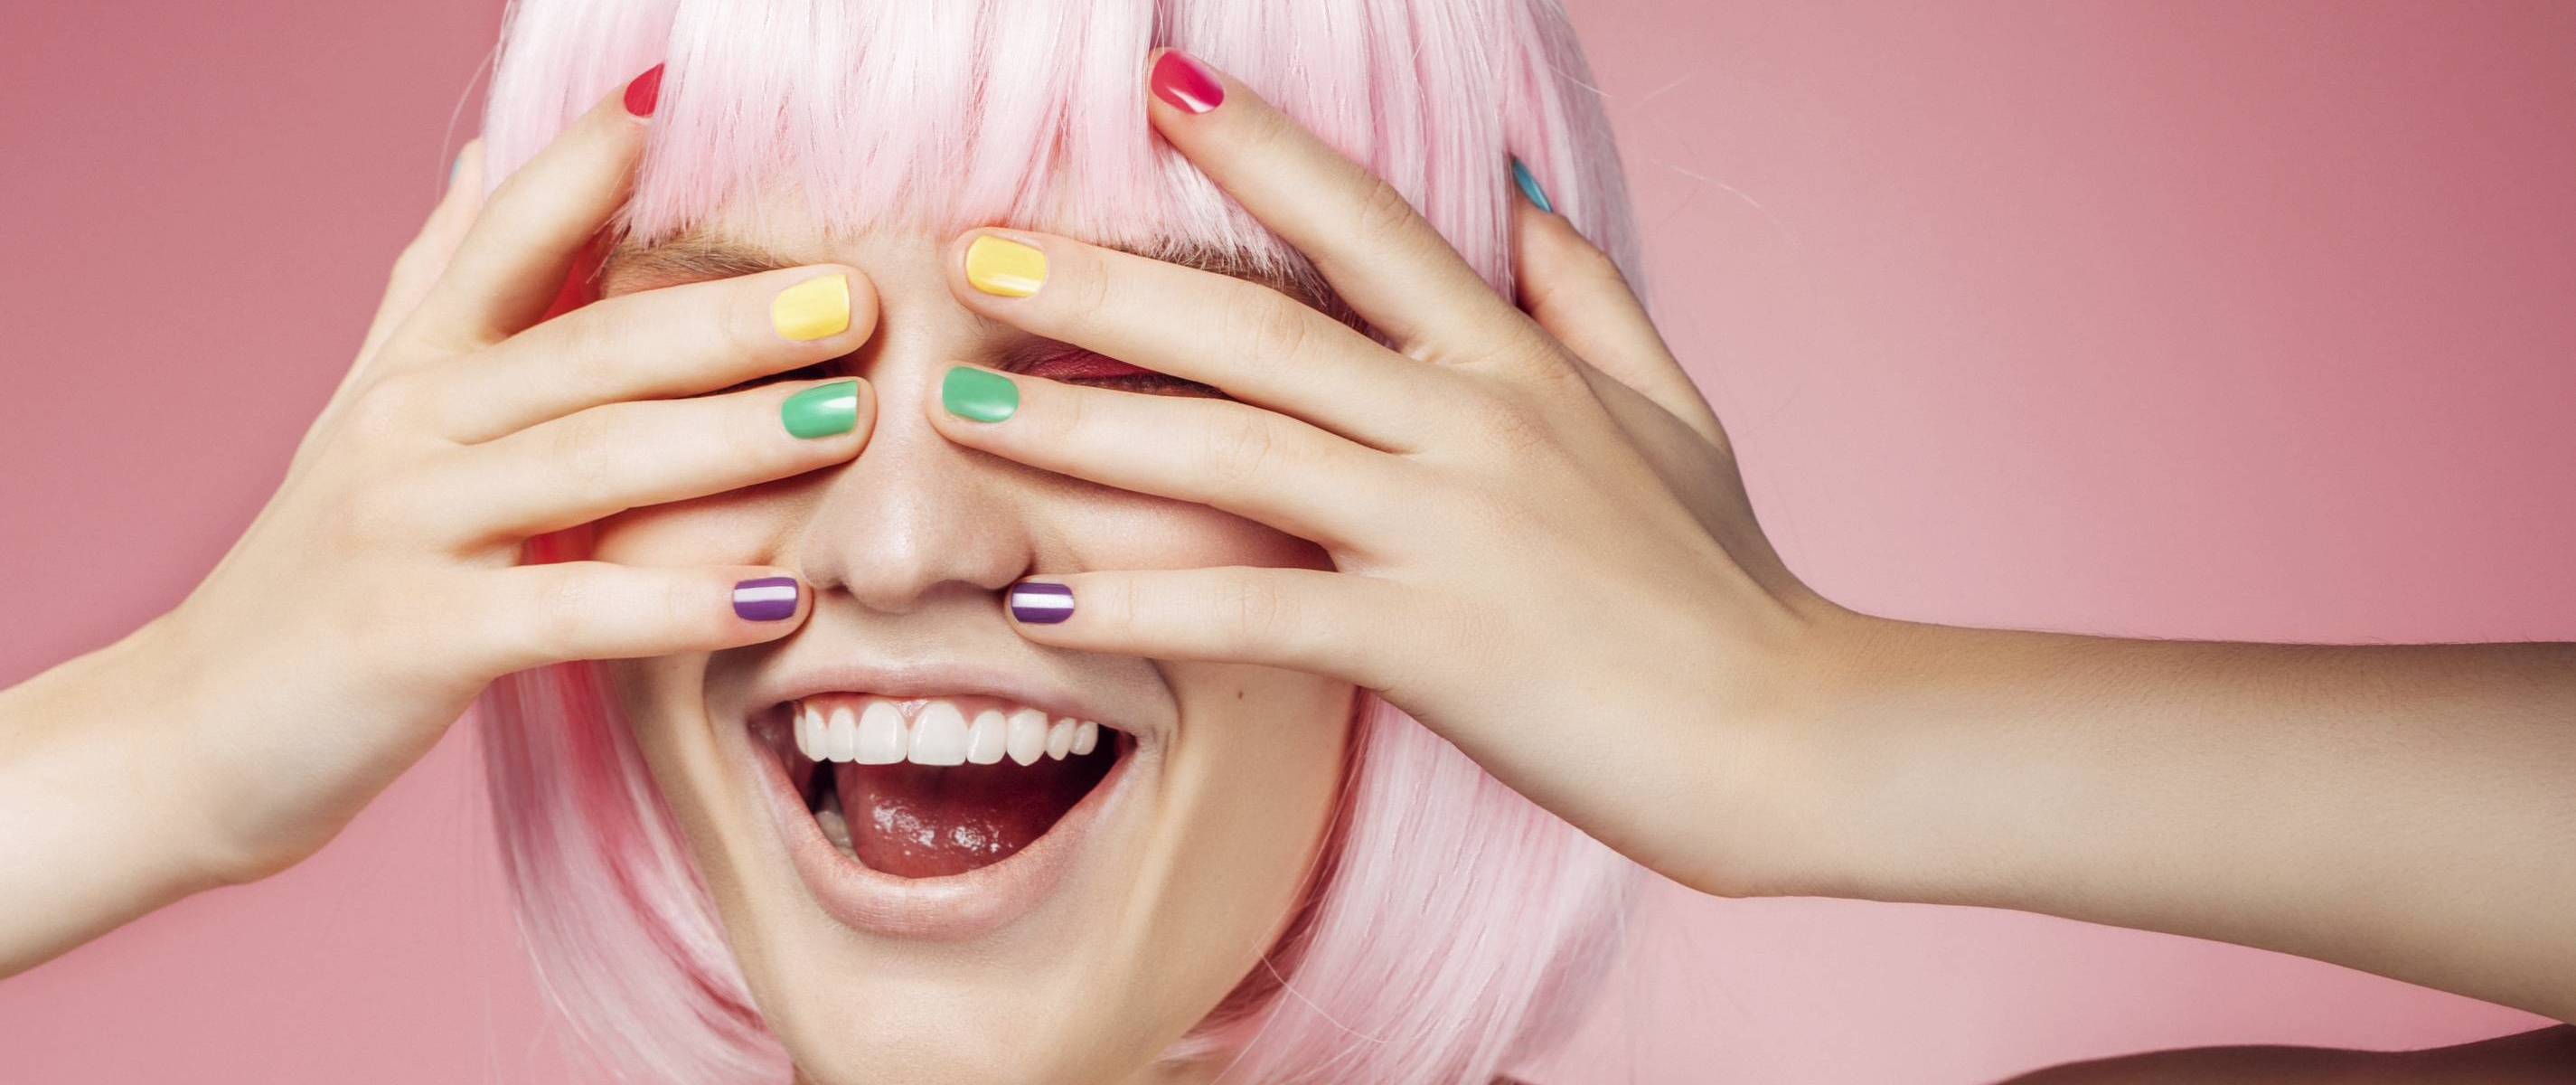 4. Sacramento's Best Nail Artists: Where to Get the Perfect Manicure - wide 10